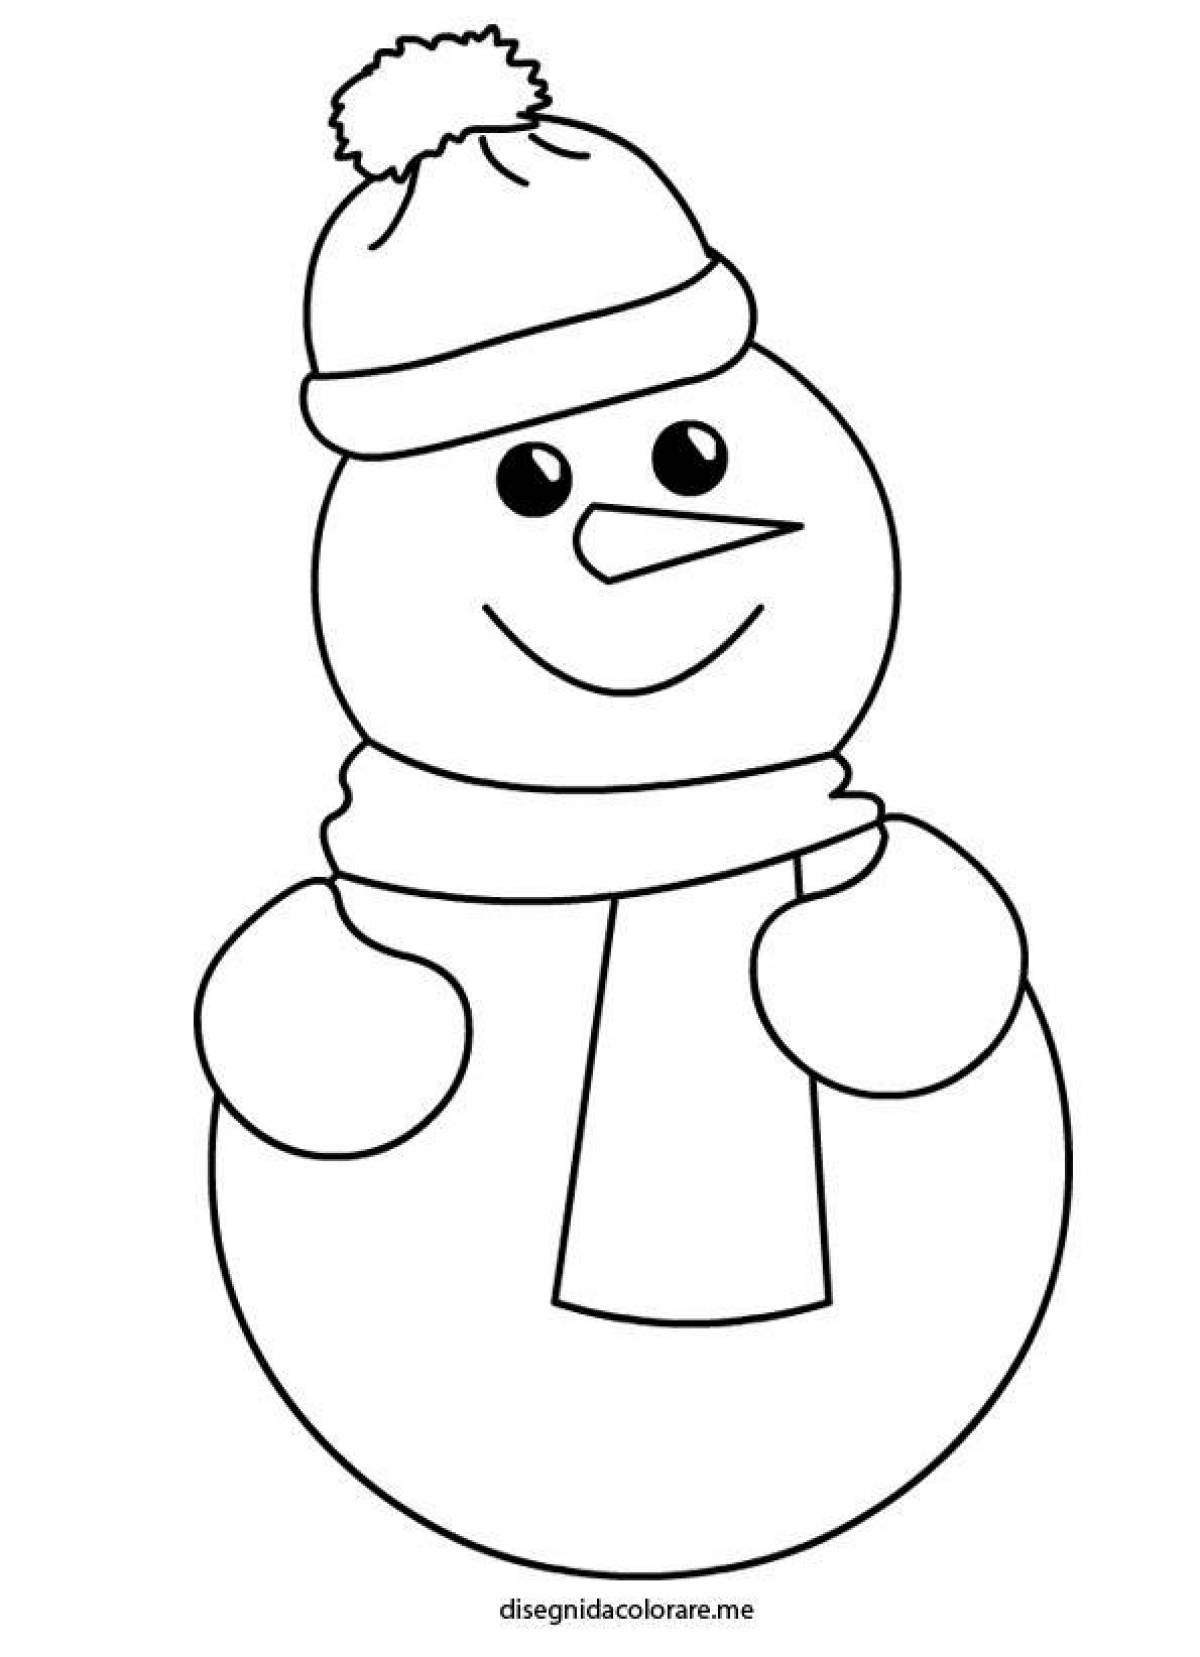 Blissful snowman coloring book